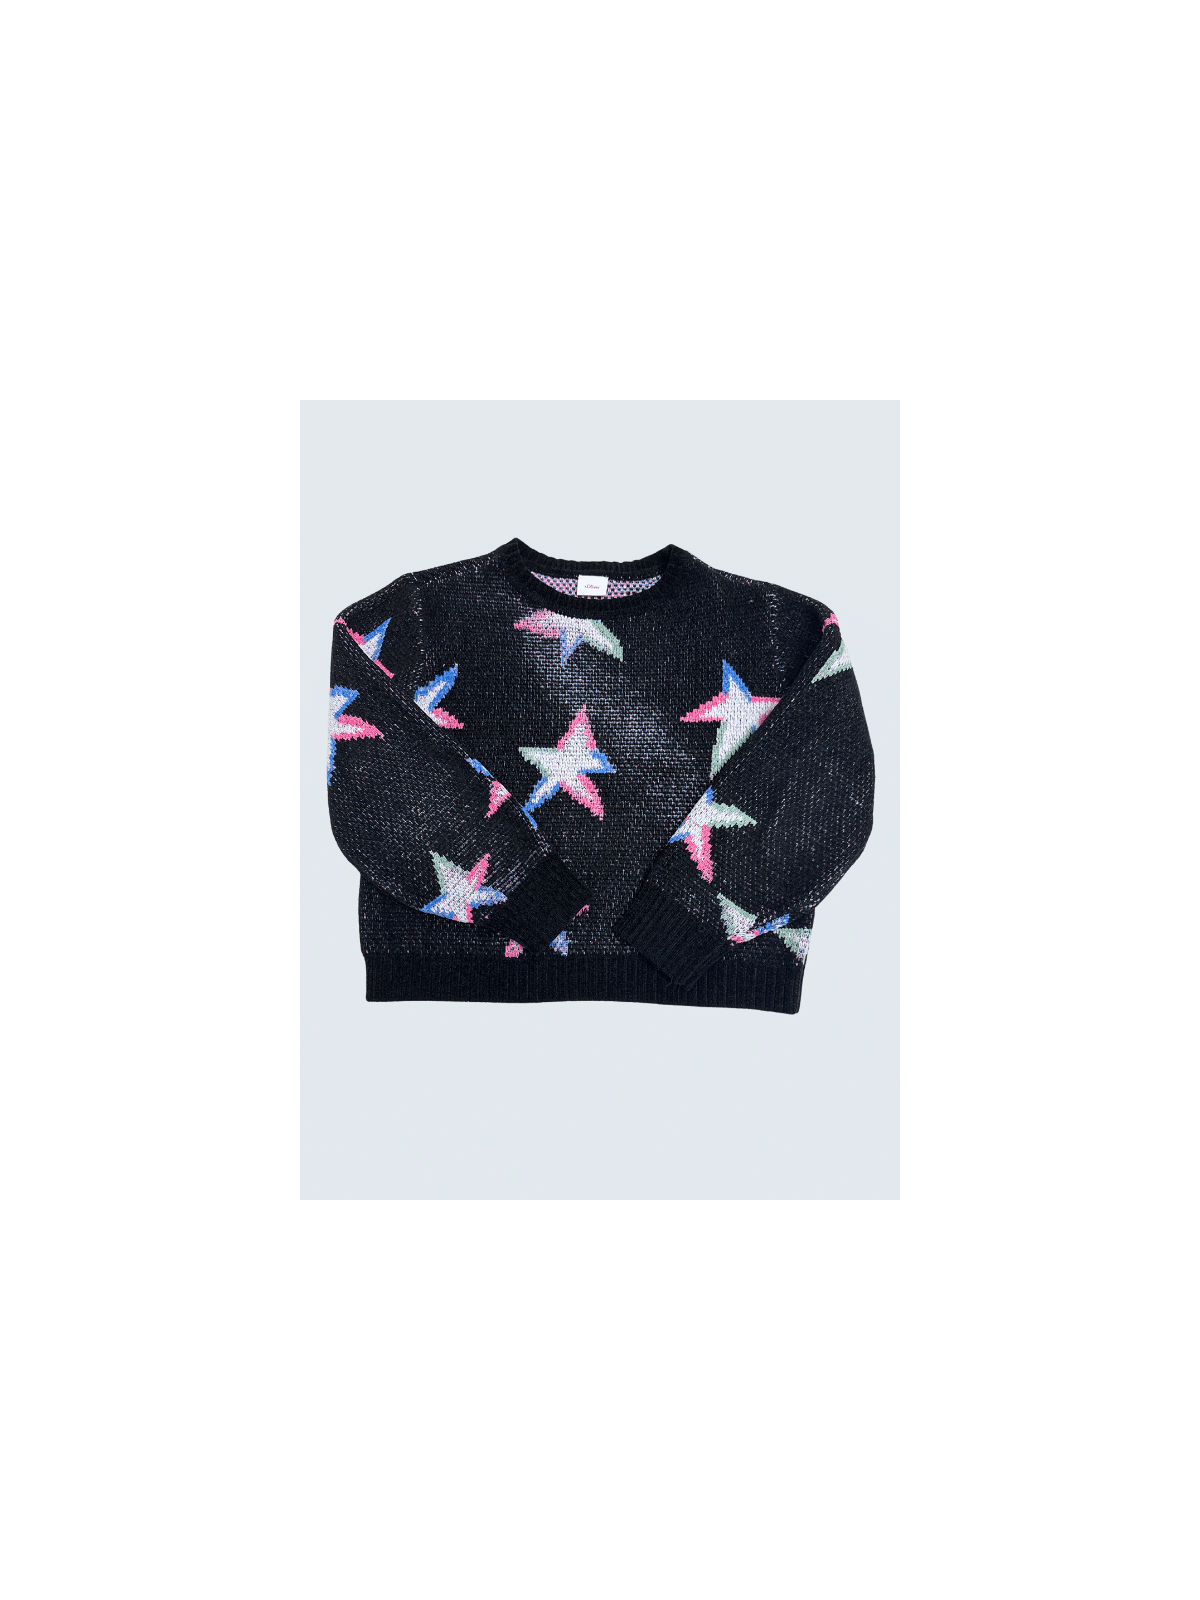 Pull d'occasion S. Oliver 8 Ans pour fille.